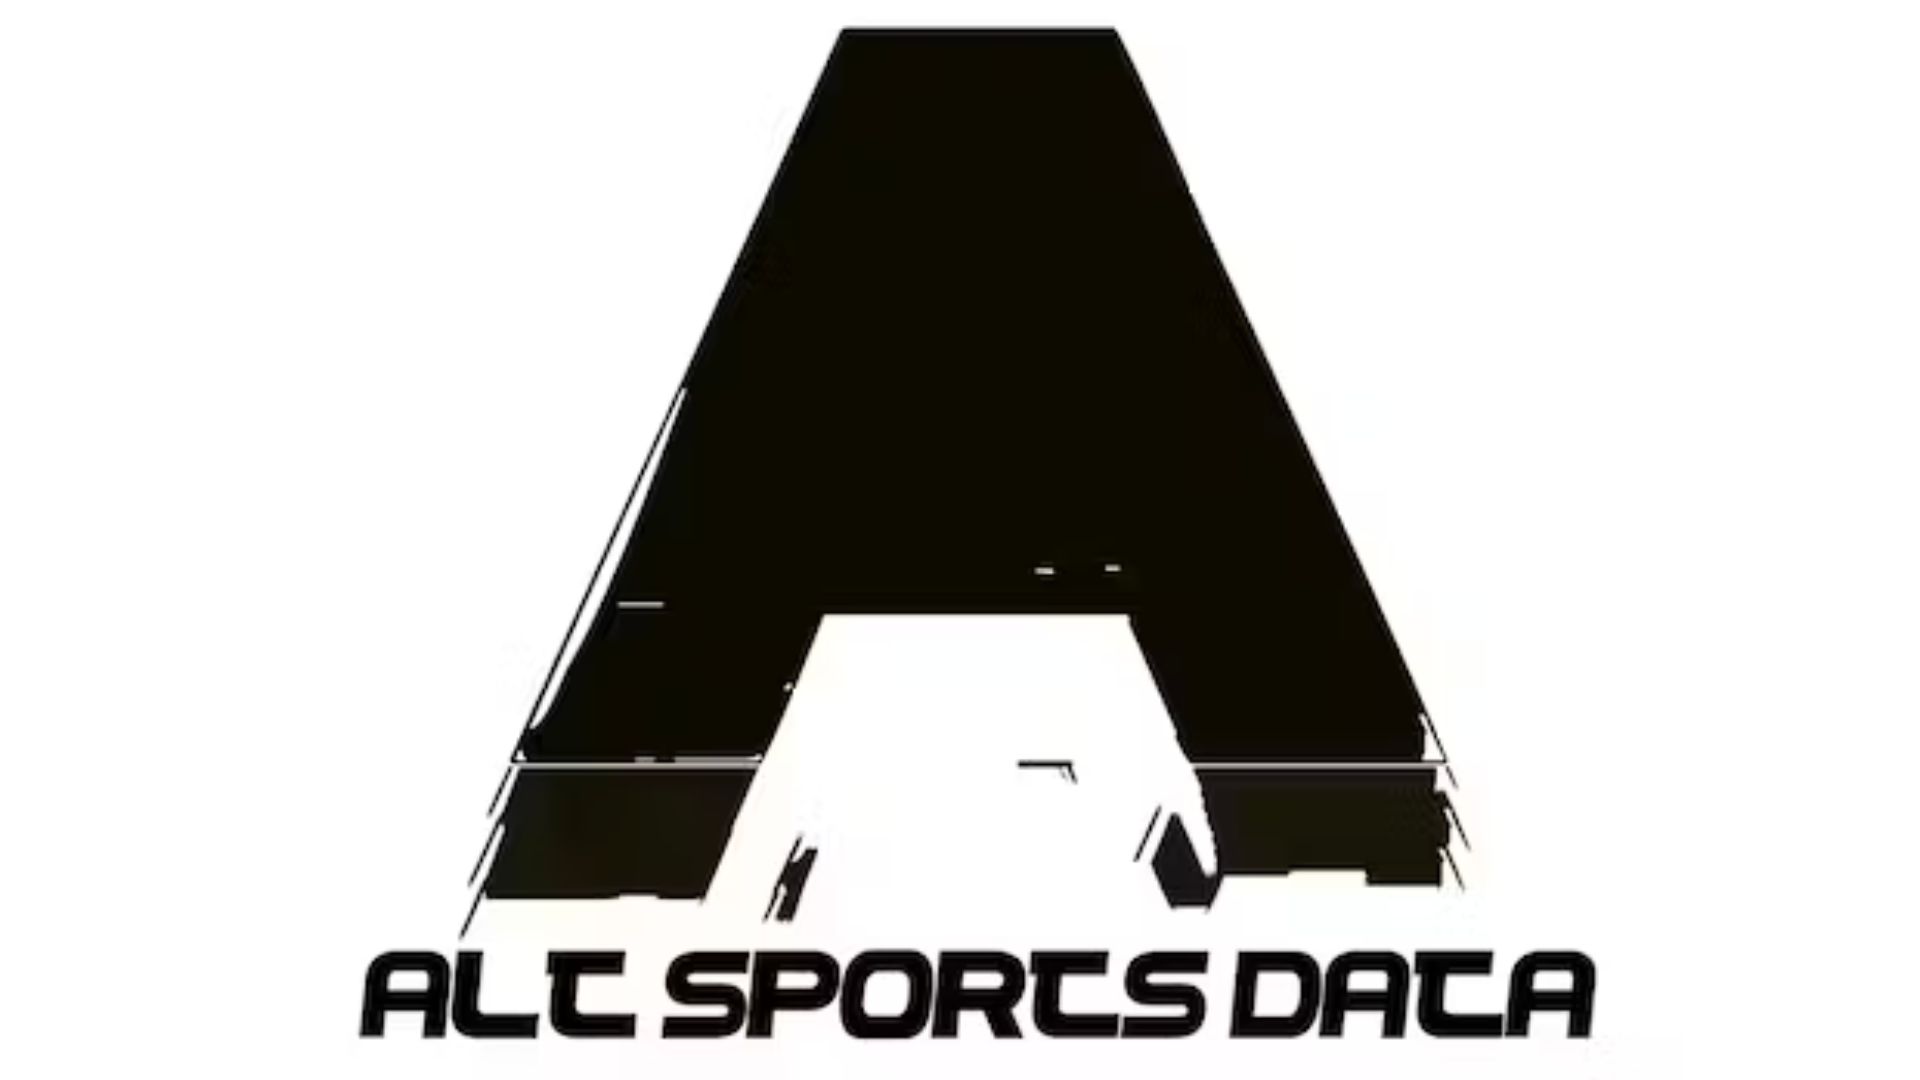 ALT Sports Data Secures $2.5 Million in Seed Funding